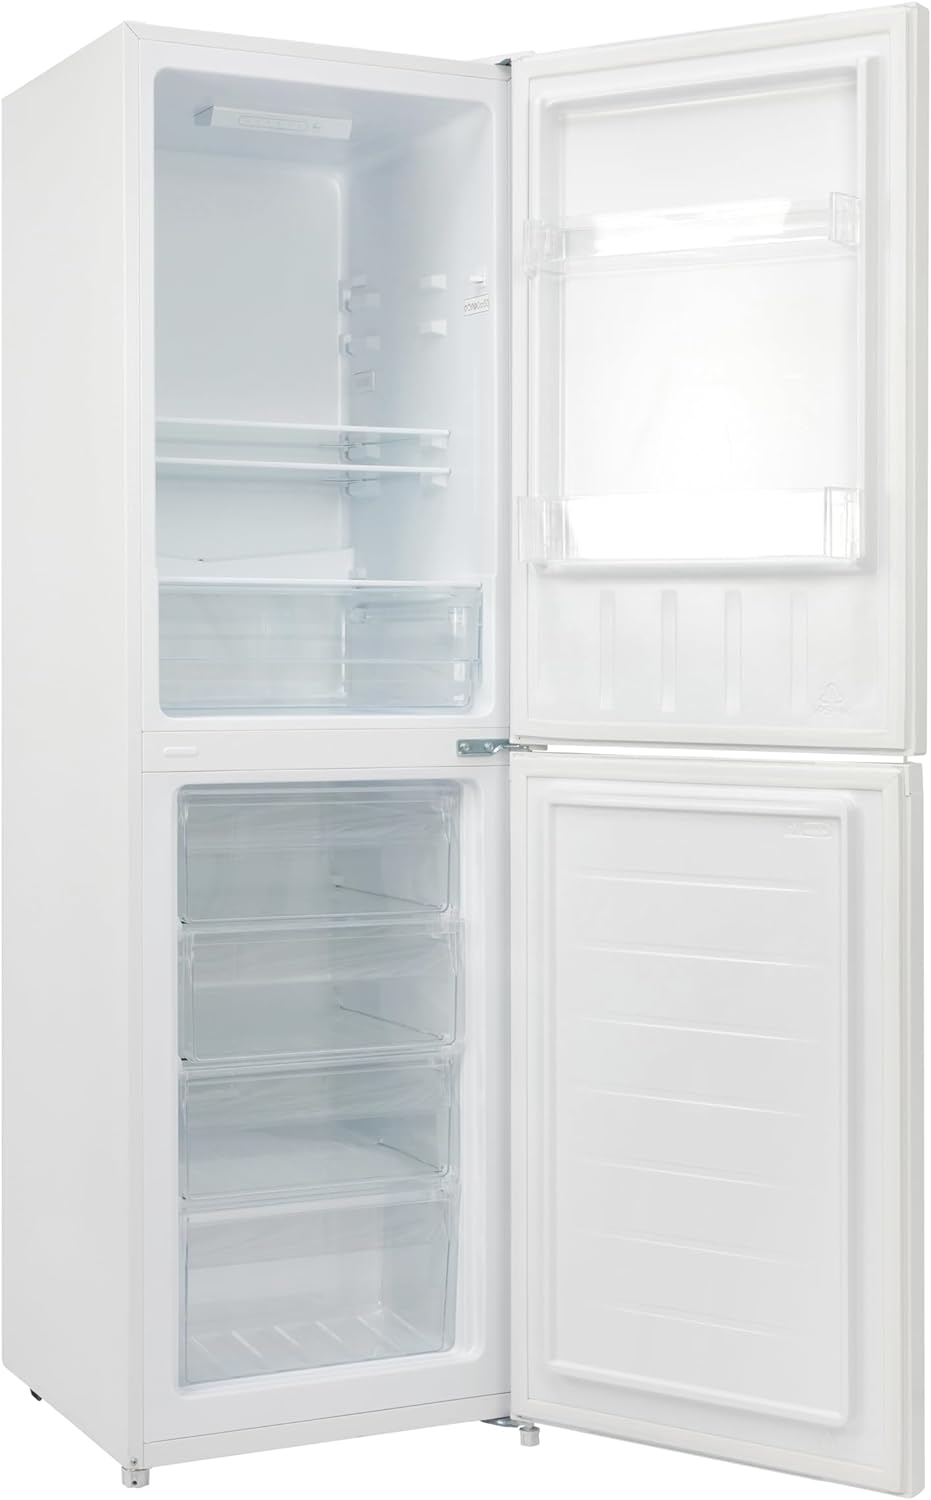 Willow WFF5050WV2 254L Low Frost Fridge Freezer with 4* Freezer Rating, Reversible Doors, LED Interior Light, Mark - Proof Finish - White - Amazing Gadgets Outlet